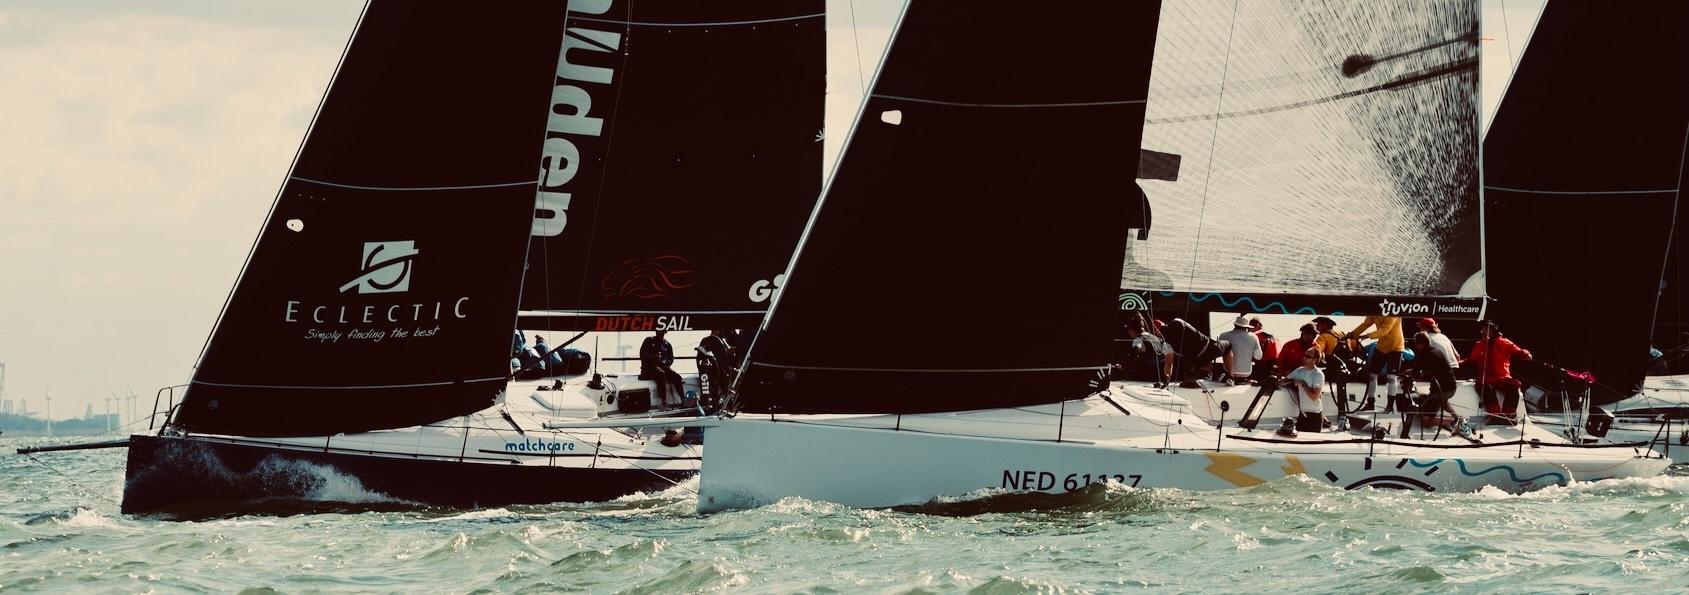 Dutch Offshore Sailing Team | Aiming for Admiral's Cup